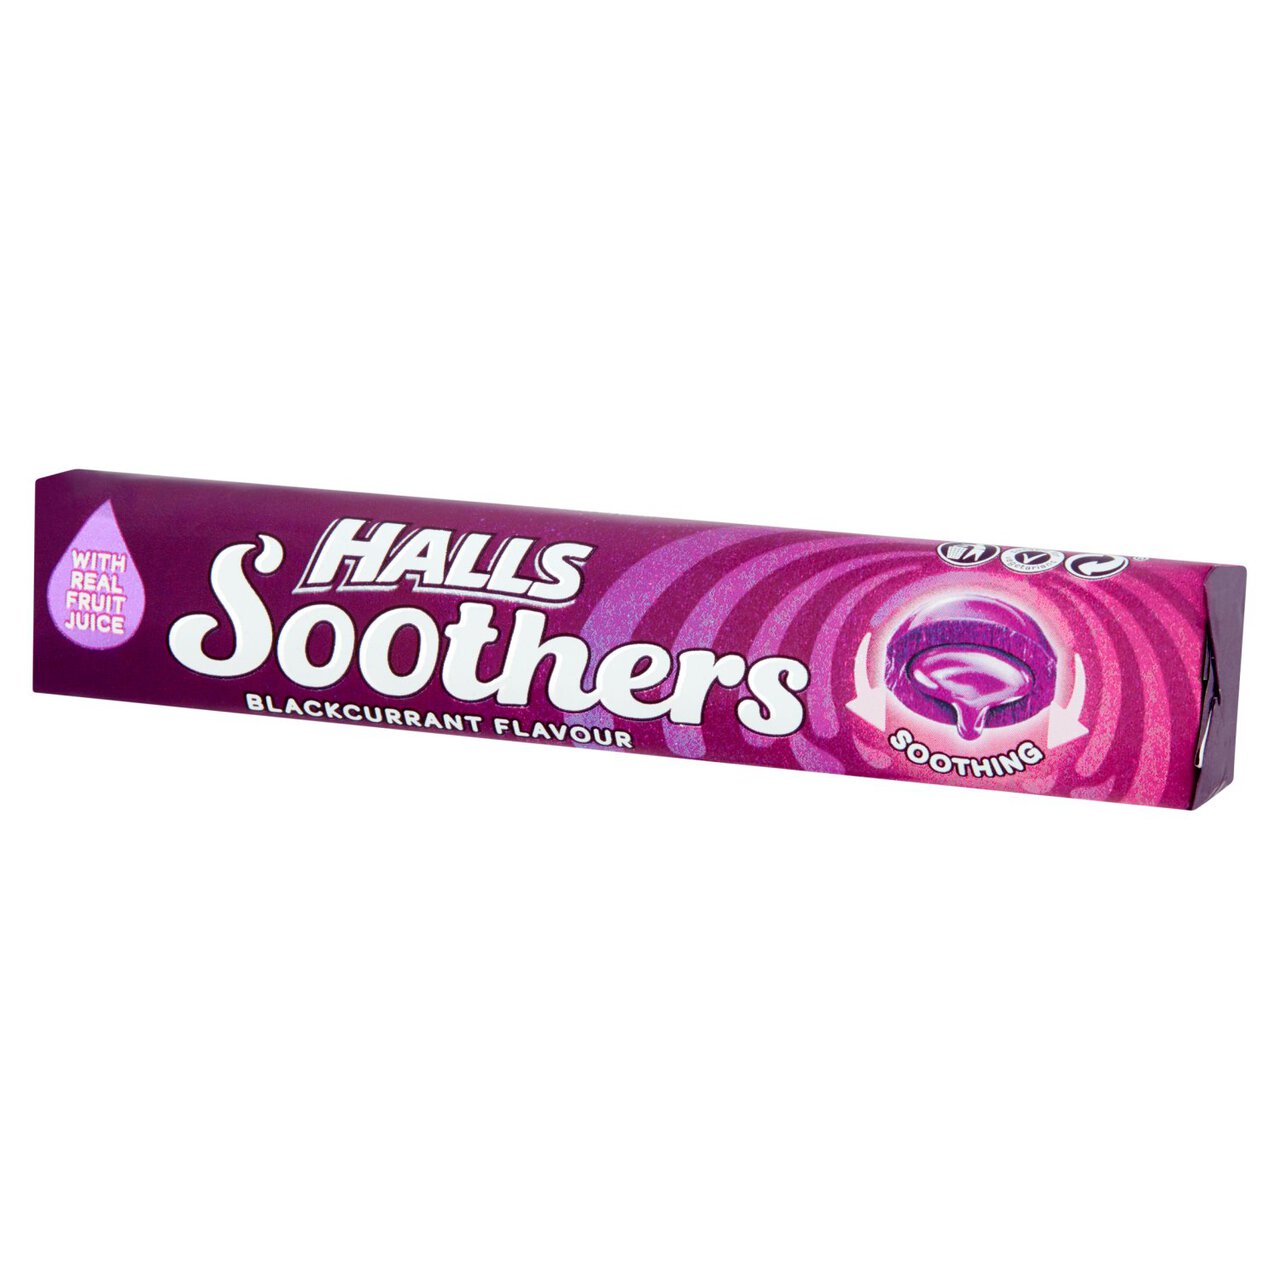 Halls Soothers Blackcurrant Sweets 45g